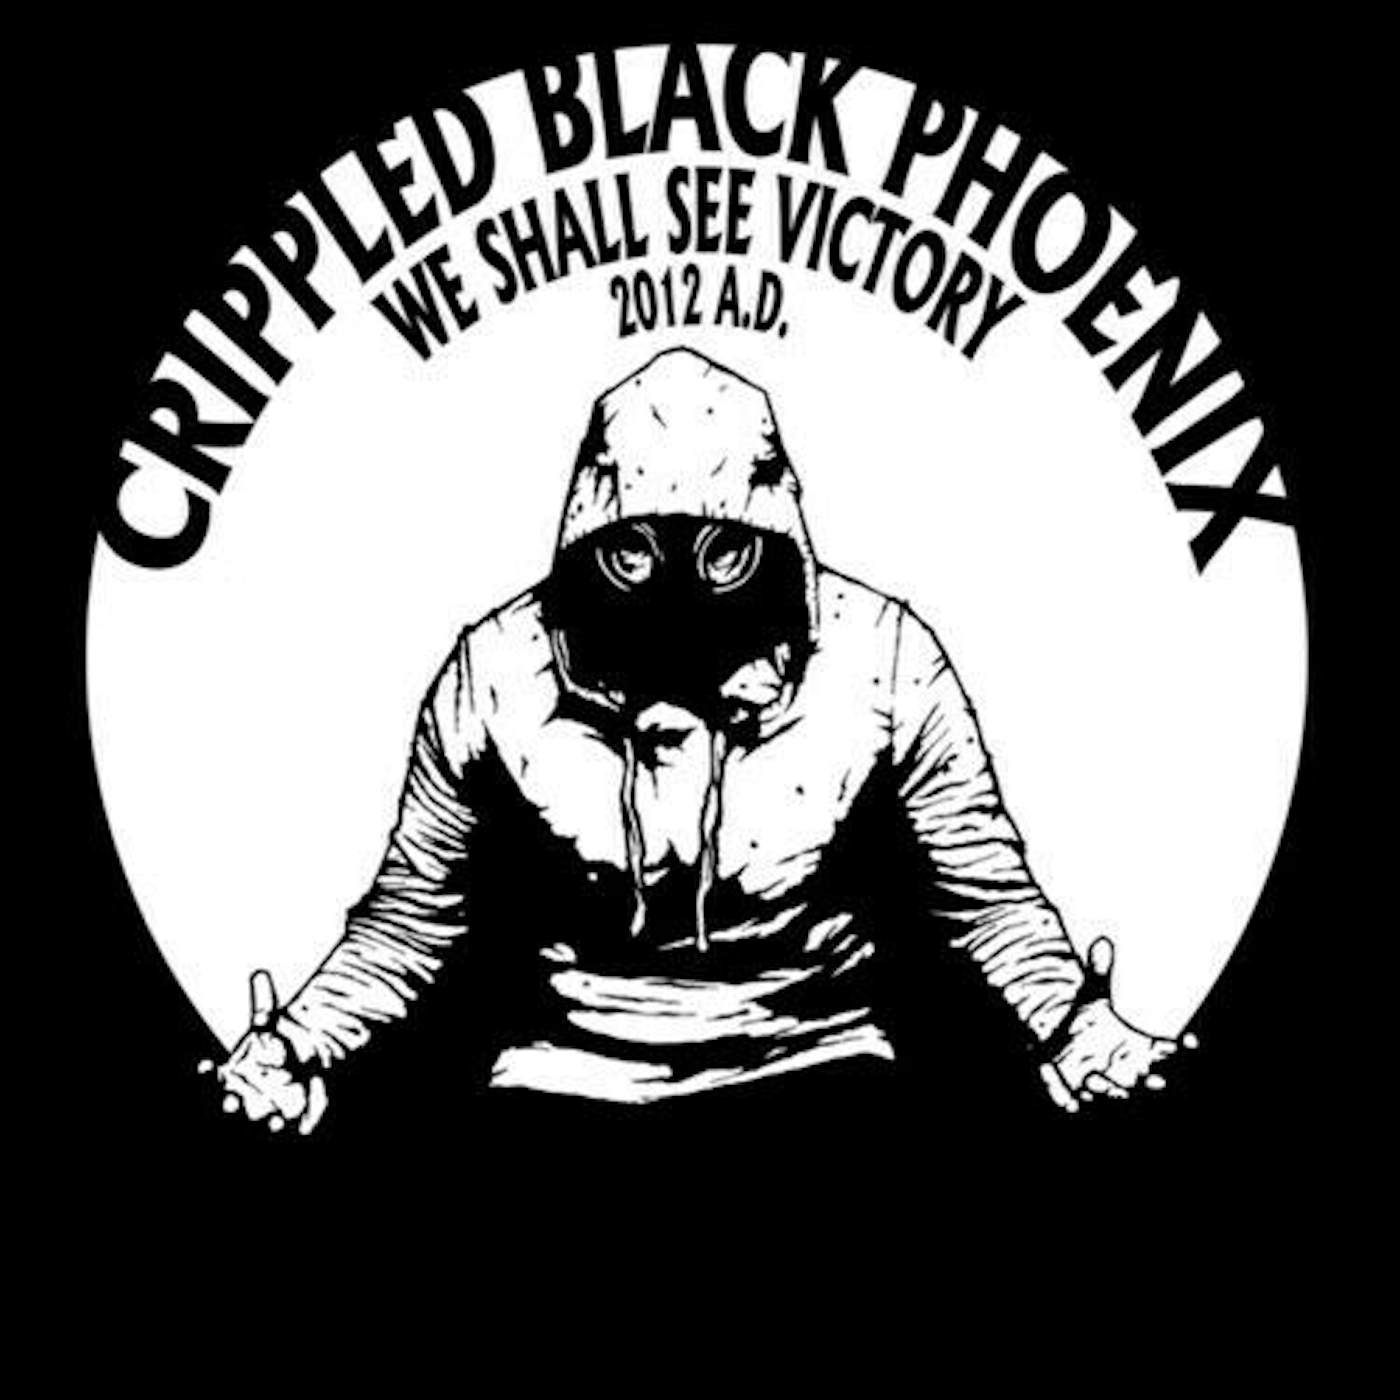 Crippled Black Phoenix WE SHALL SEE VICTORY: LIVE IN BERLIN 2012 Vinyl Record